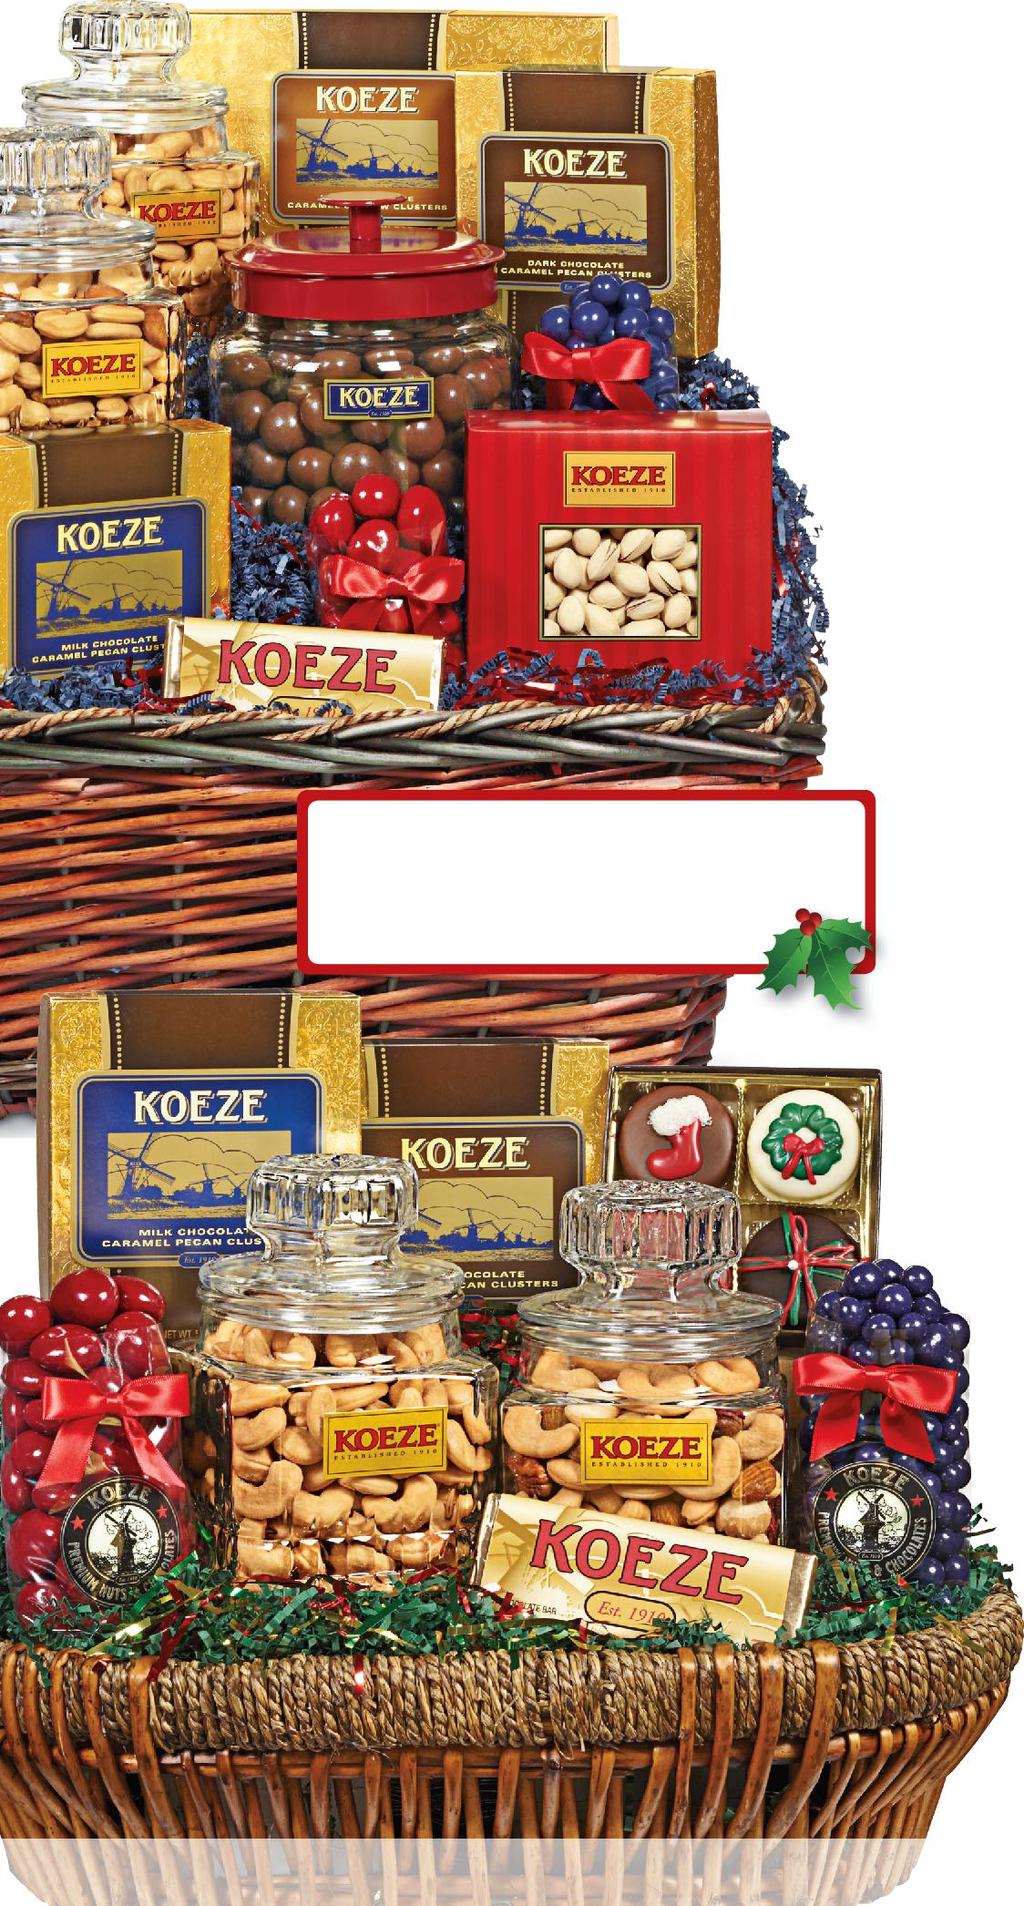 GIFT BASKETS COLOSSAL BASKET A beautiful wicker basket artfully packed with Colossal Cashews and a stunning collection of nuts, turtles and tantalizing sweets.